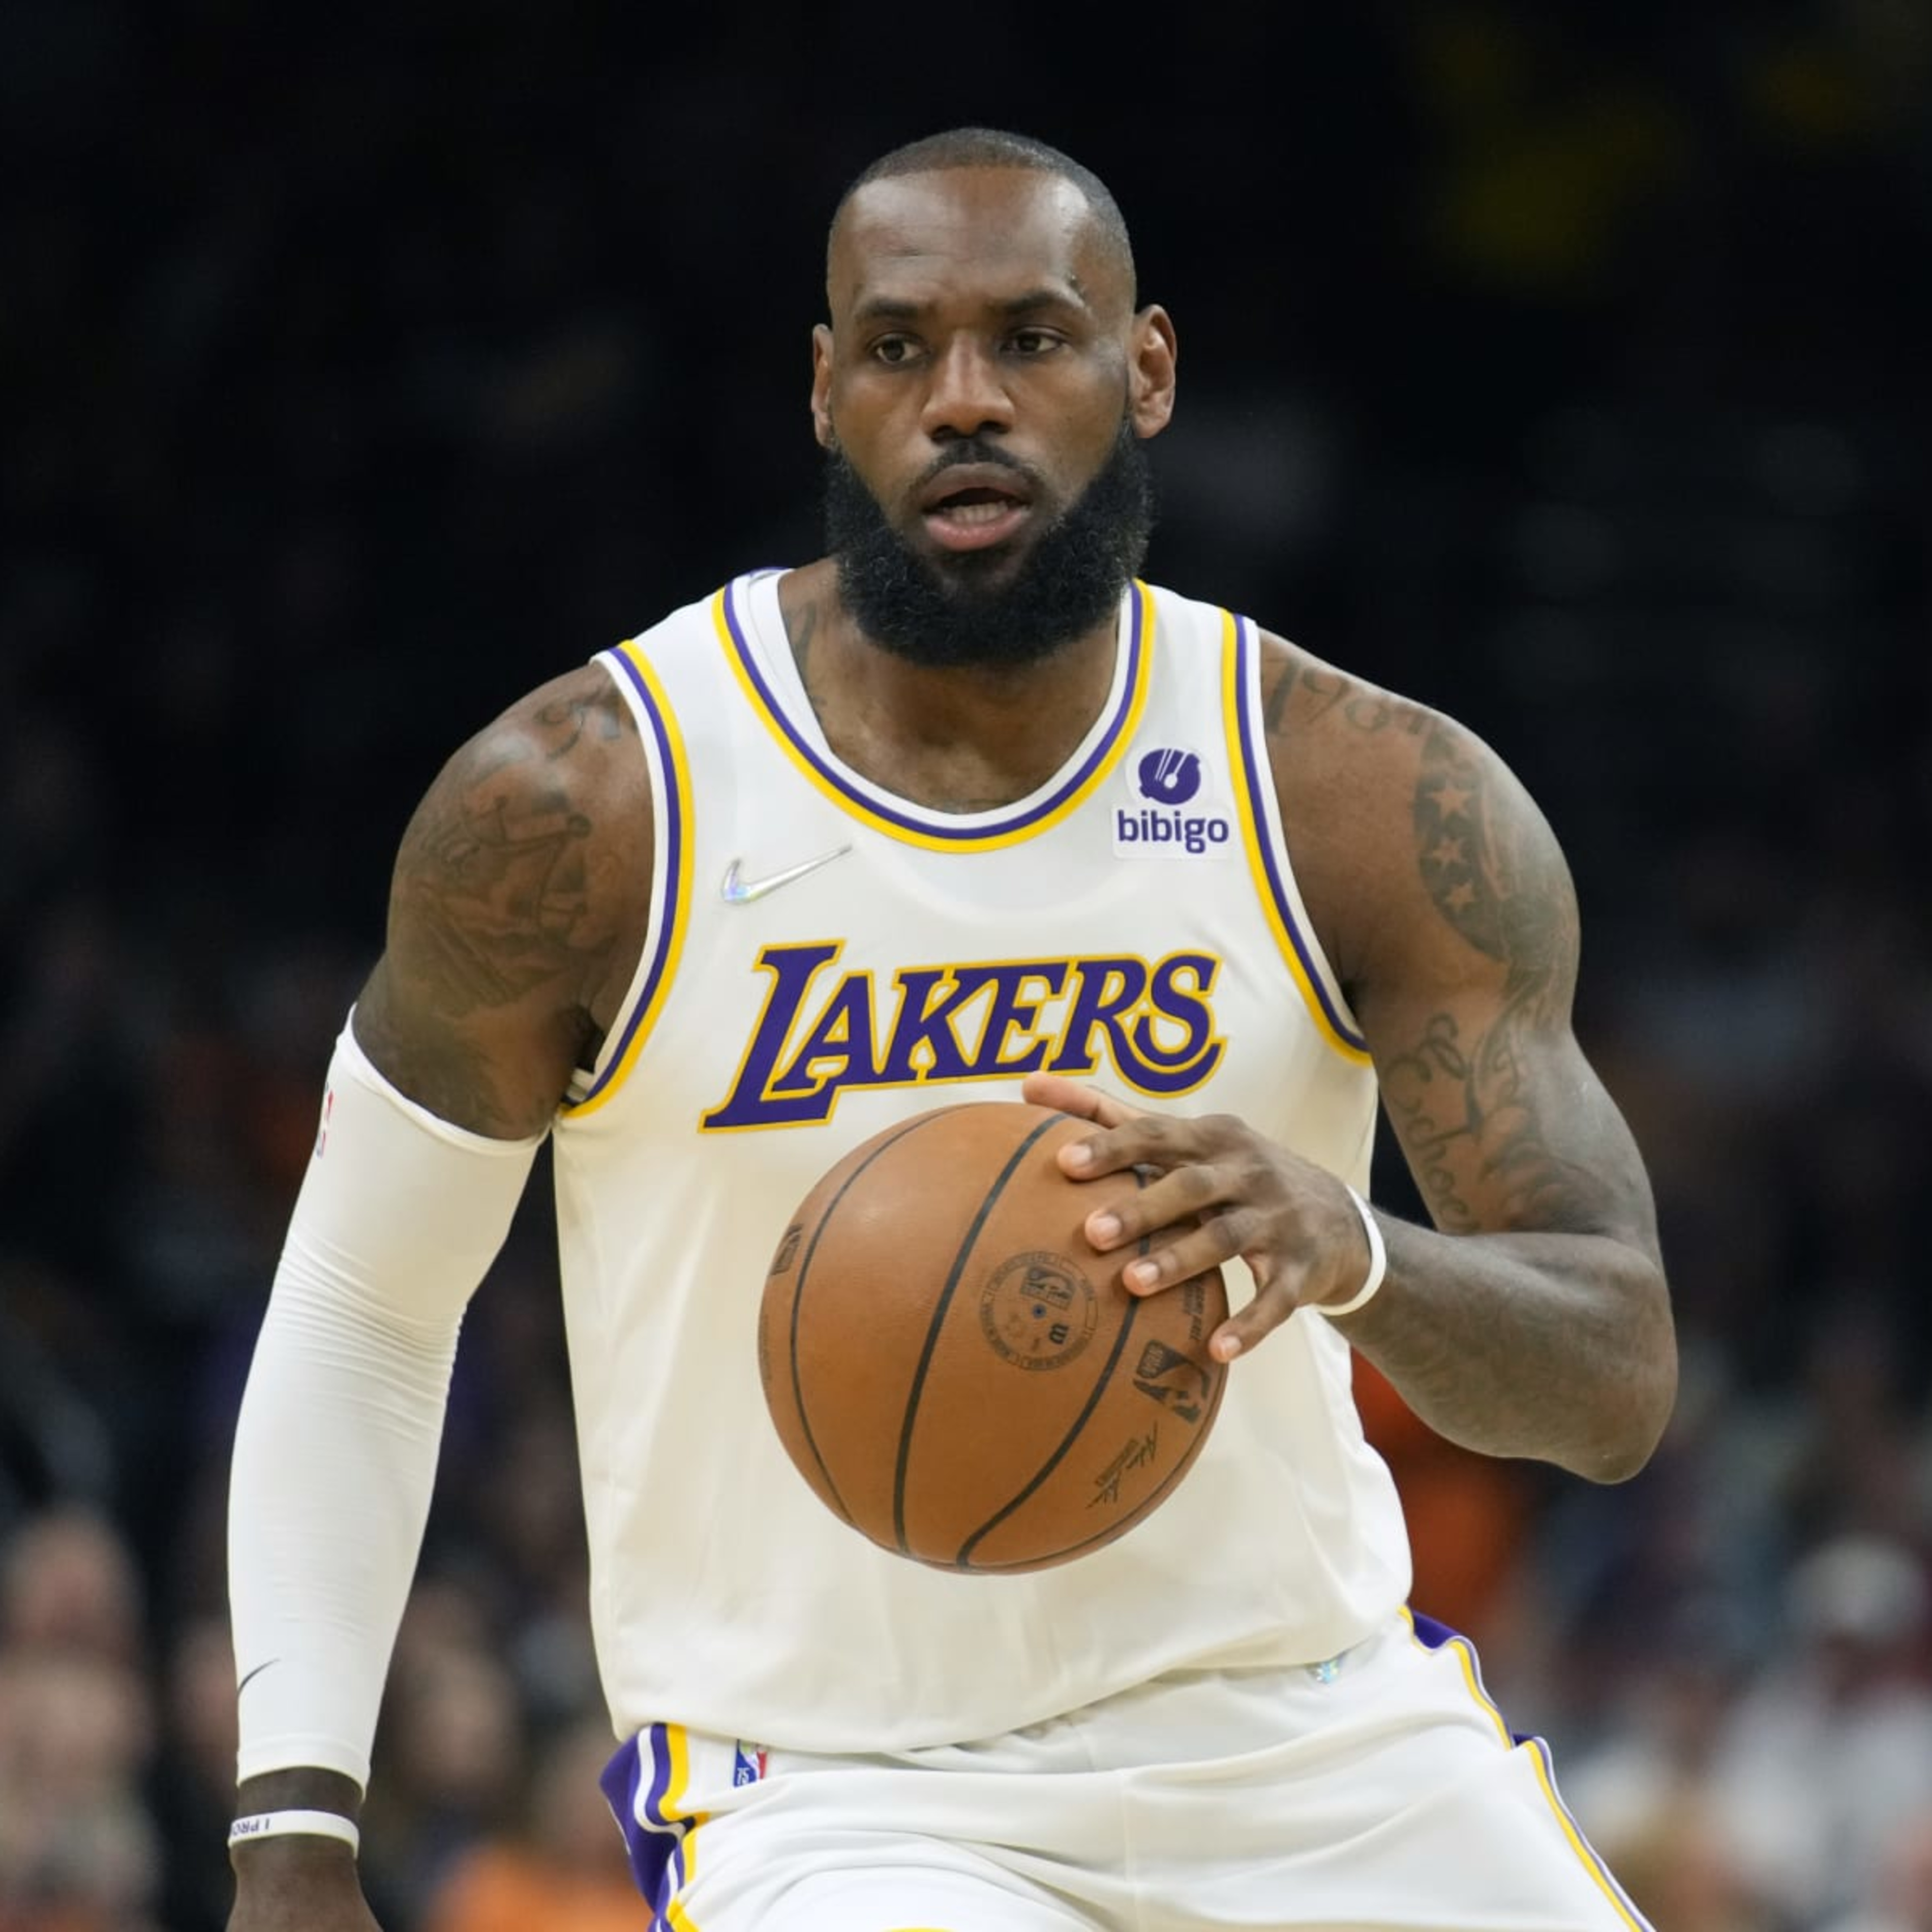 Lakers' LeBron James to Take Part in Drew League for 1st Time Since 2011